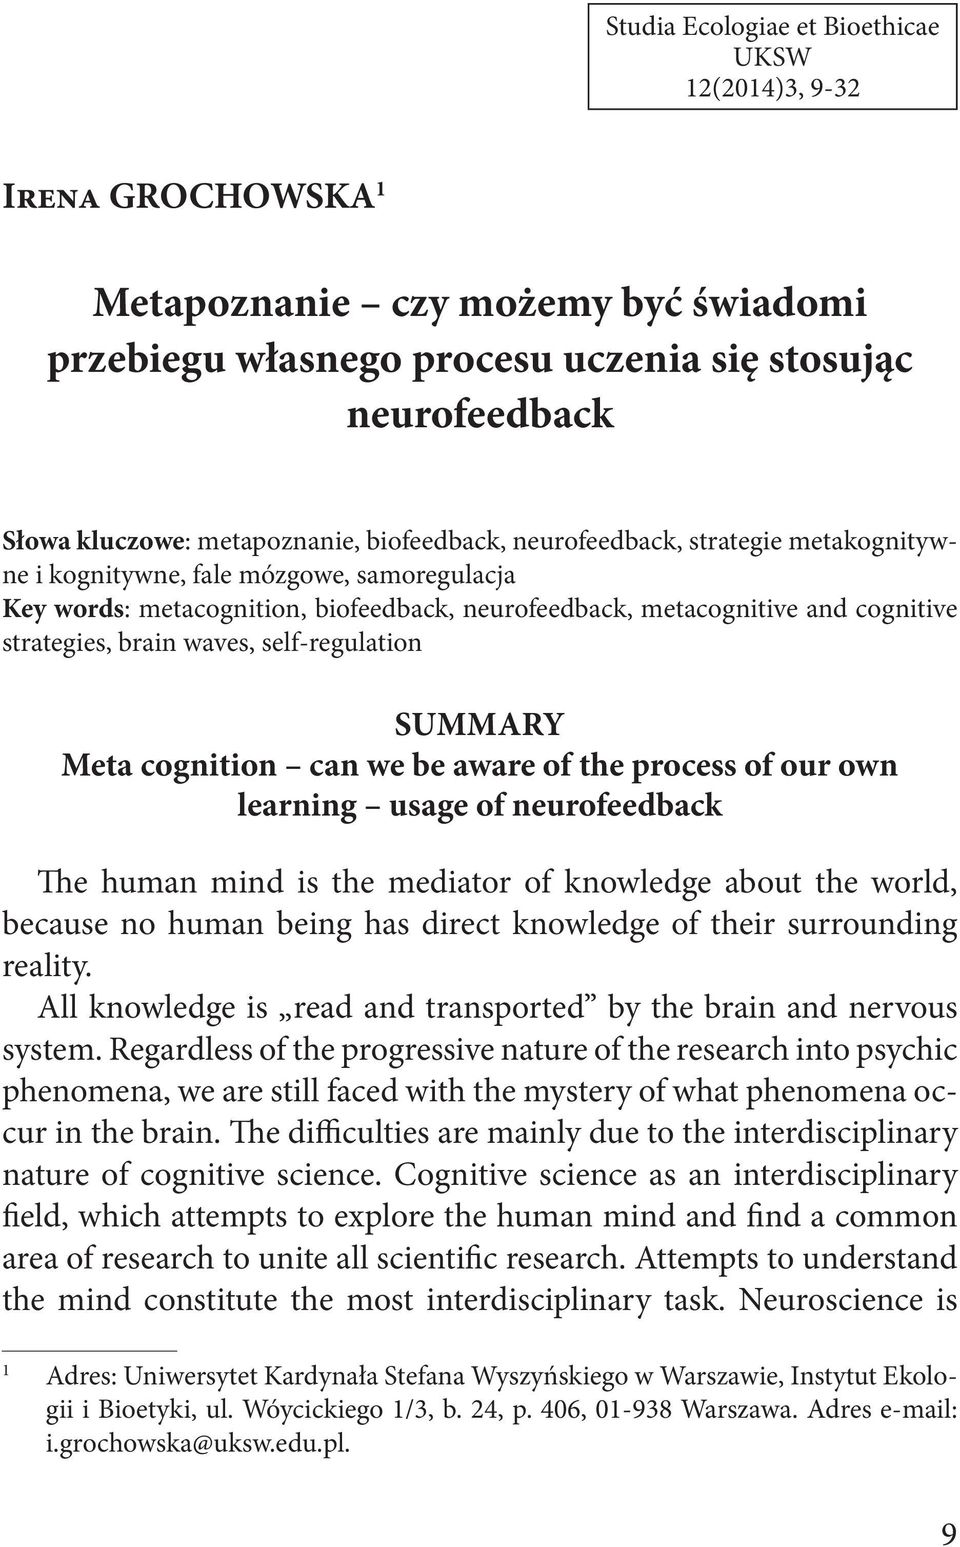 waves, self-regulation SUMMARY Meta cognition can we be aware of the process of our own learning usage of neurofeedback The human mind is the mediator of knowledge about the world, because no human